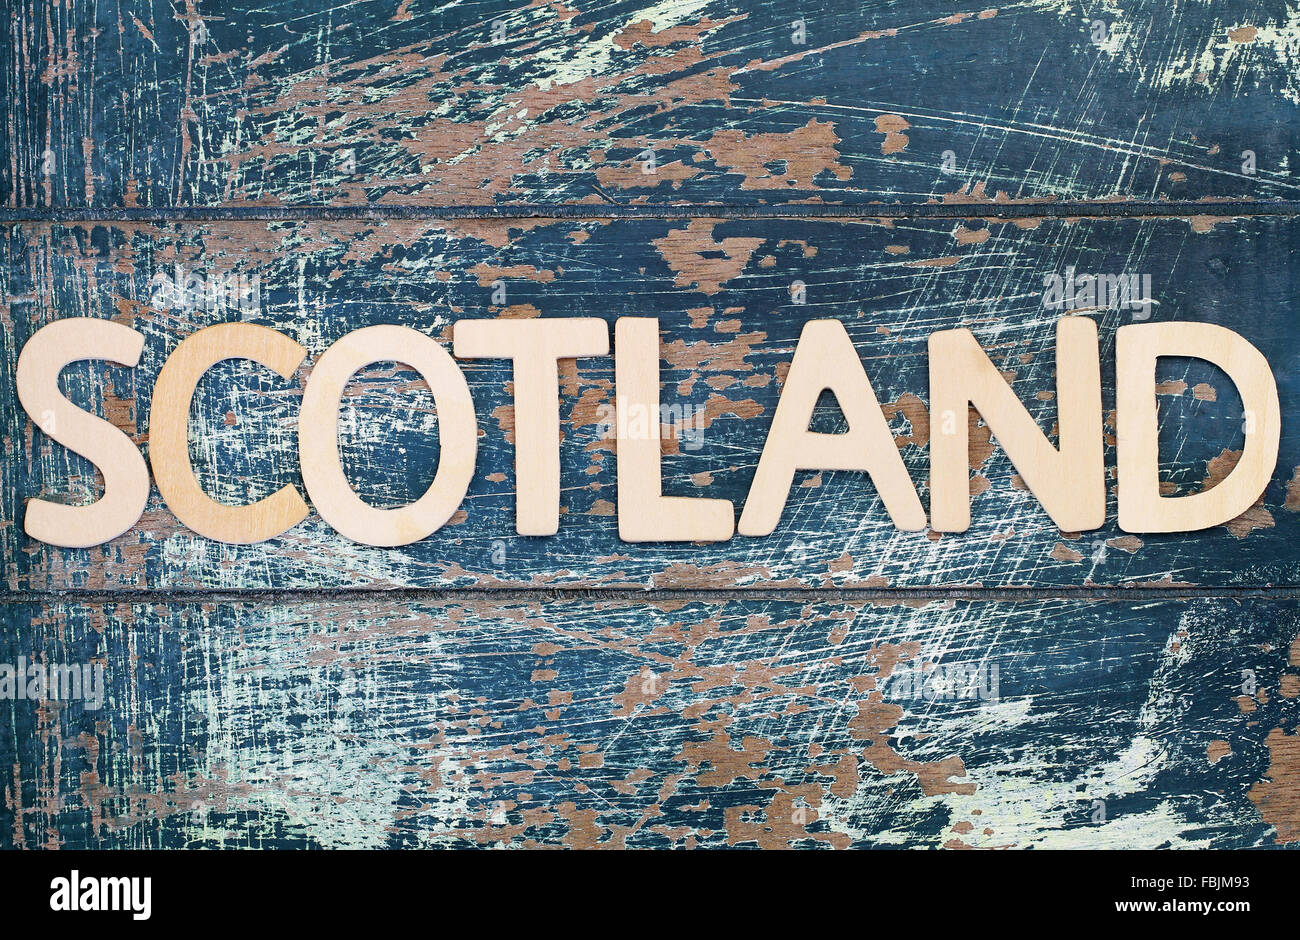 Scotland written with wooden letters on rustic surface Stock Photo